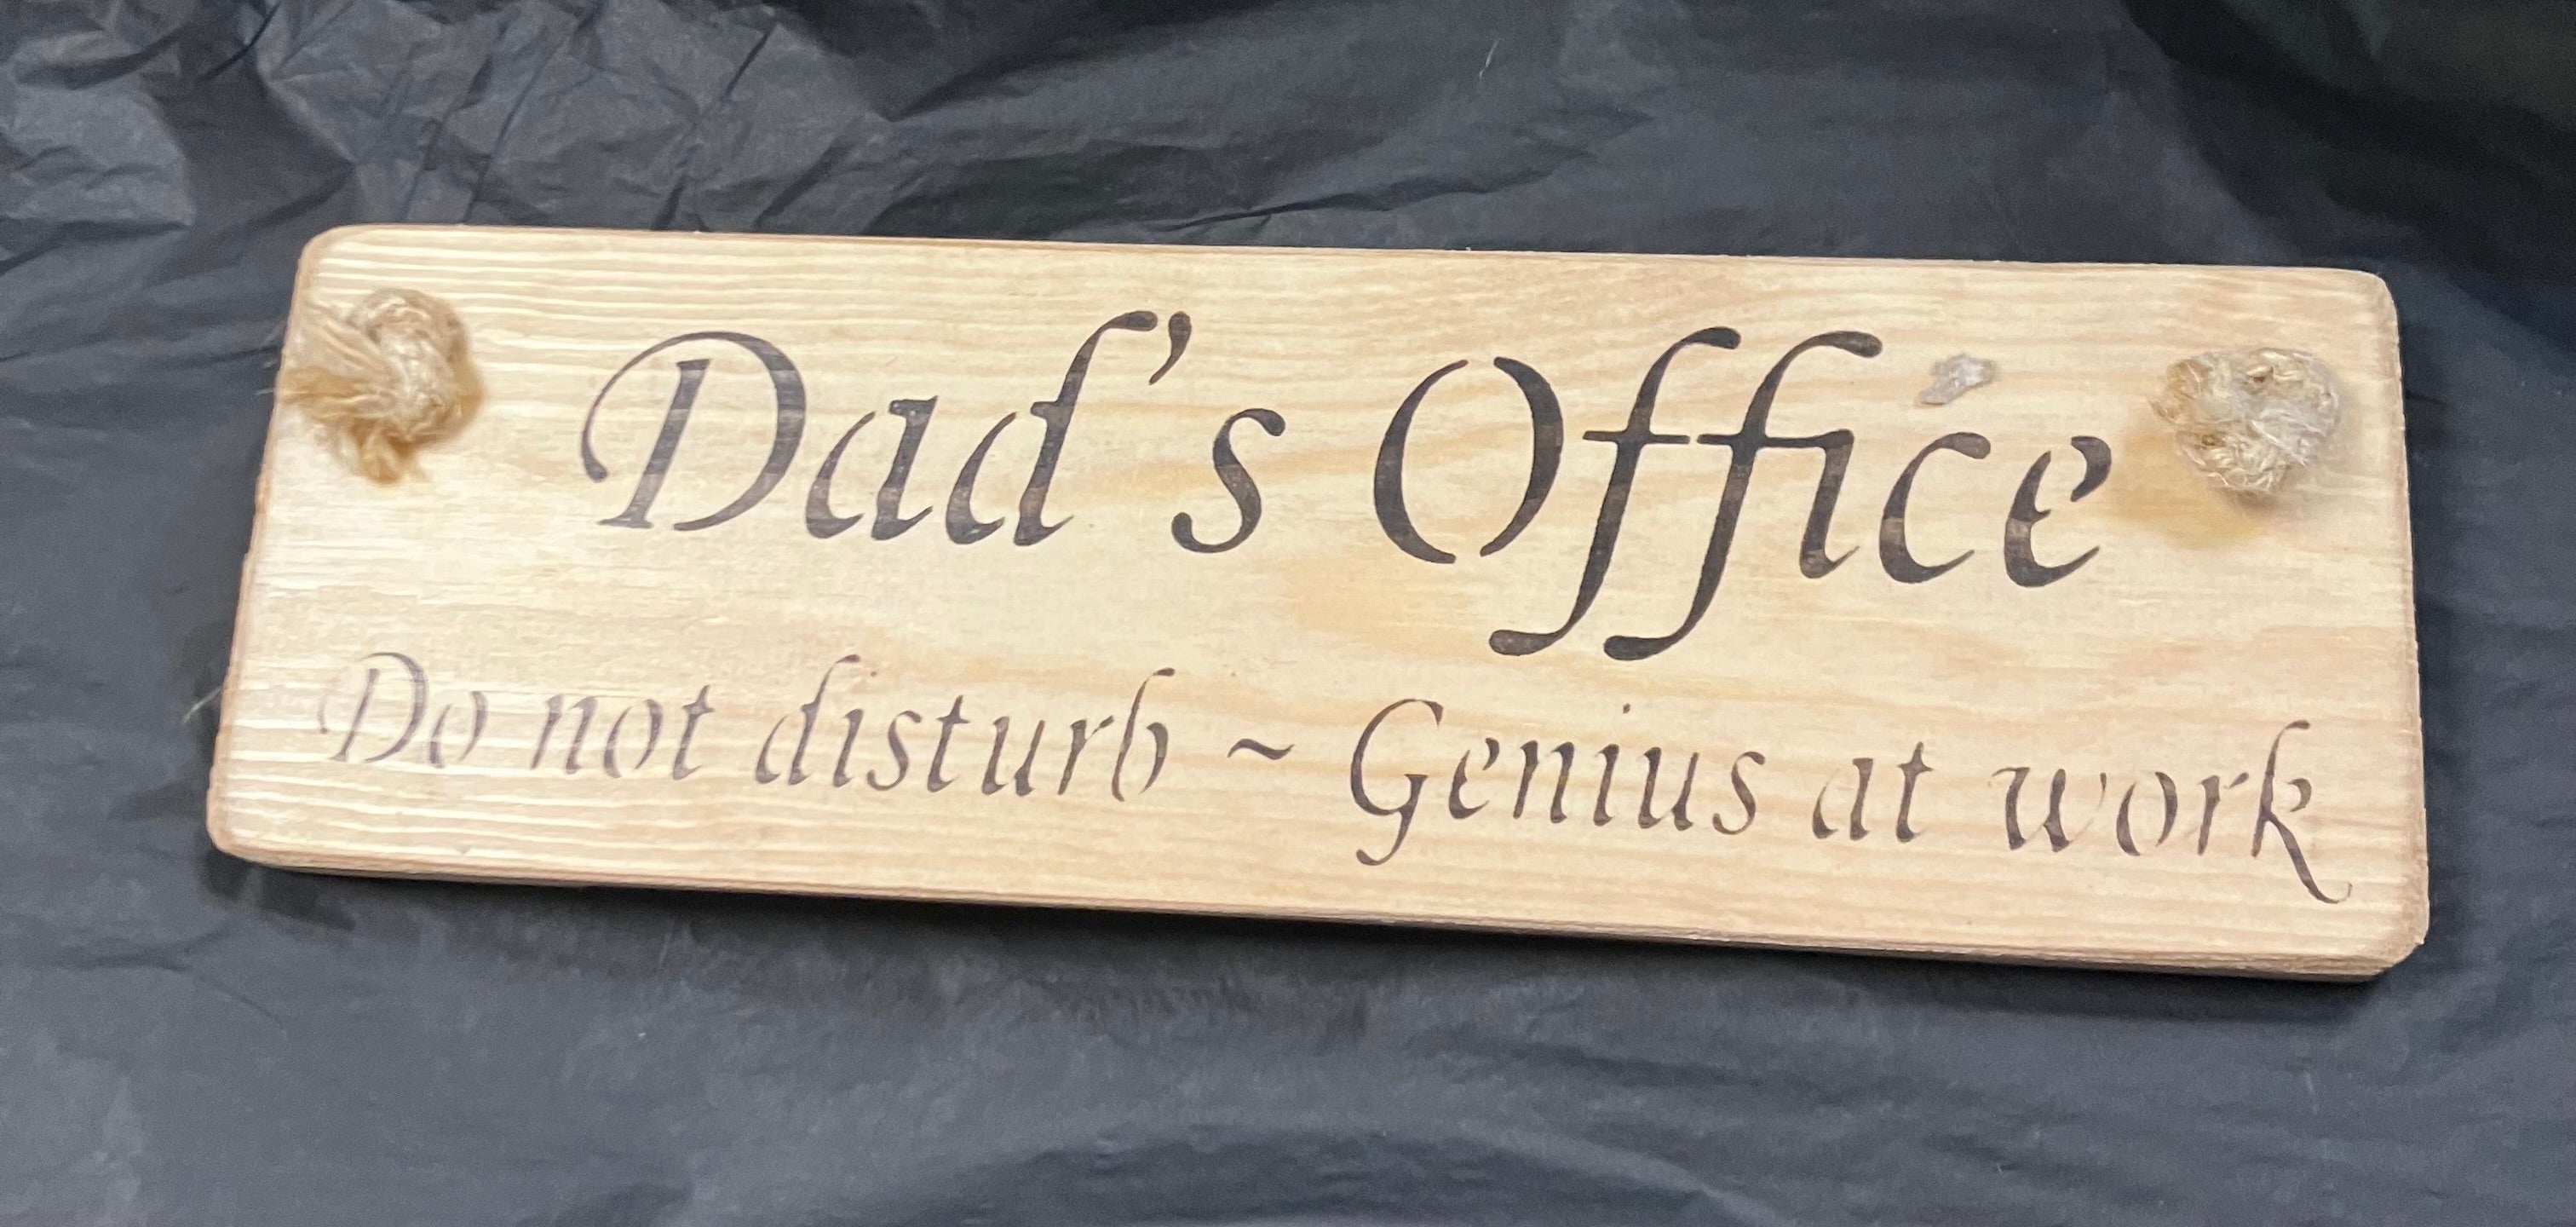 Dads Office Do not disturb - Genius at Work roped sign - SALE